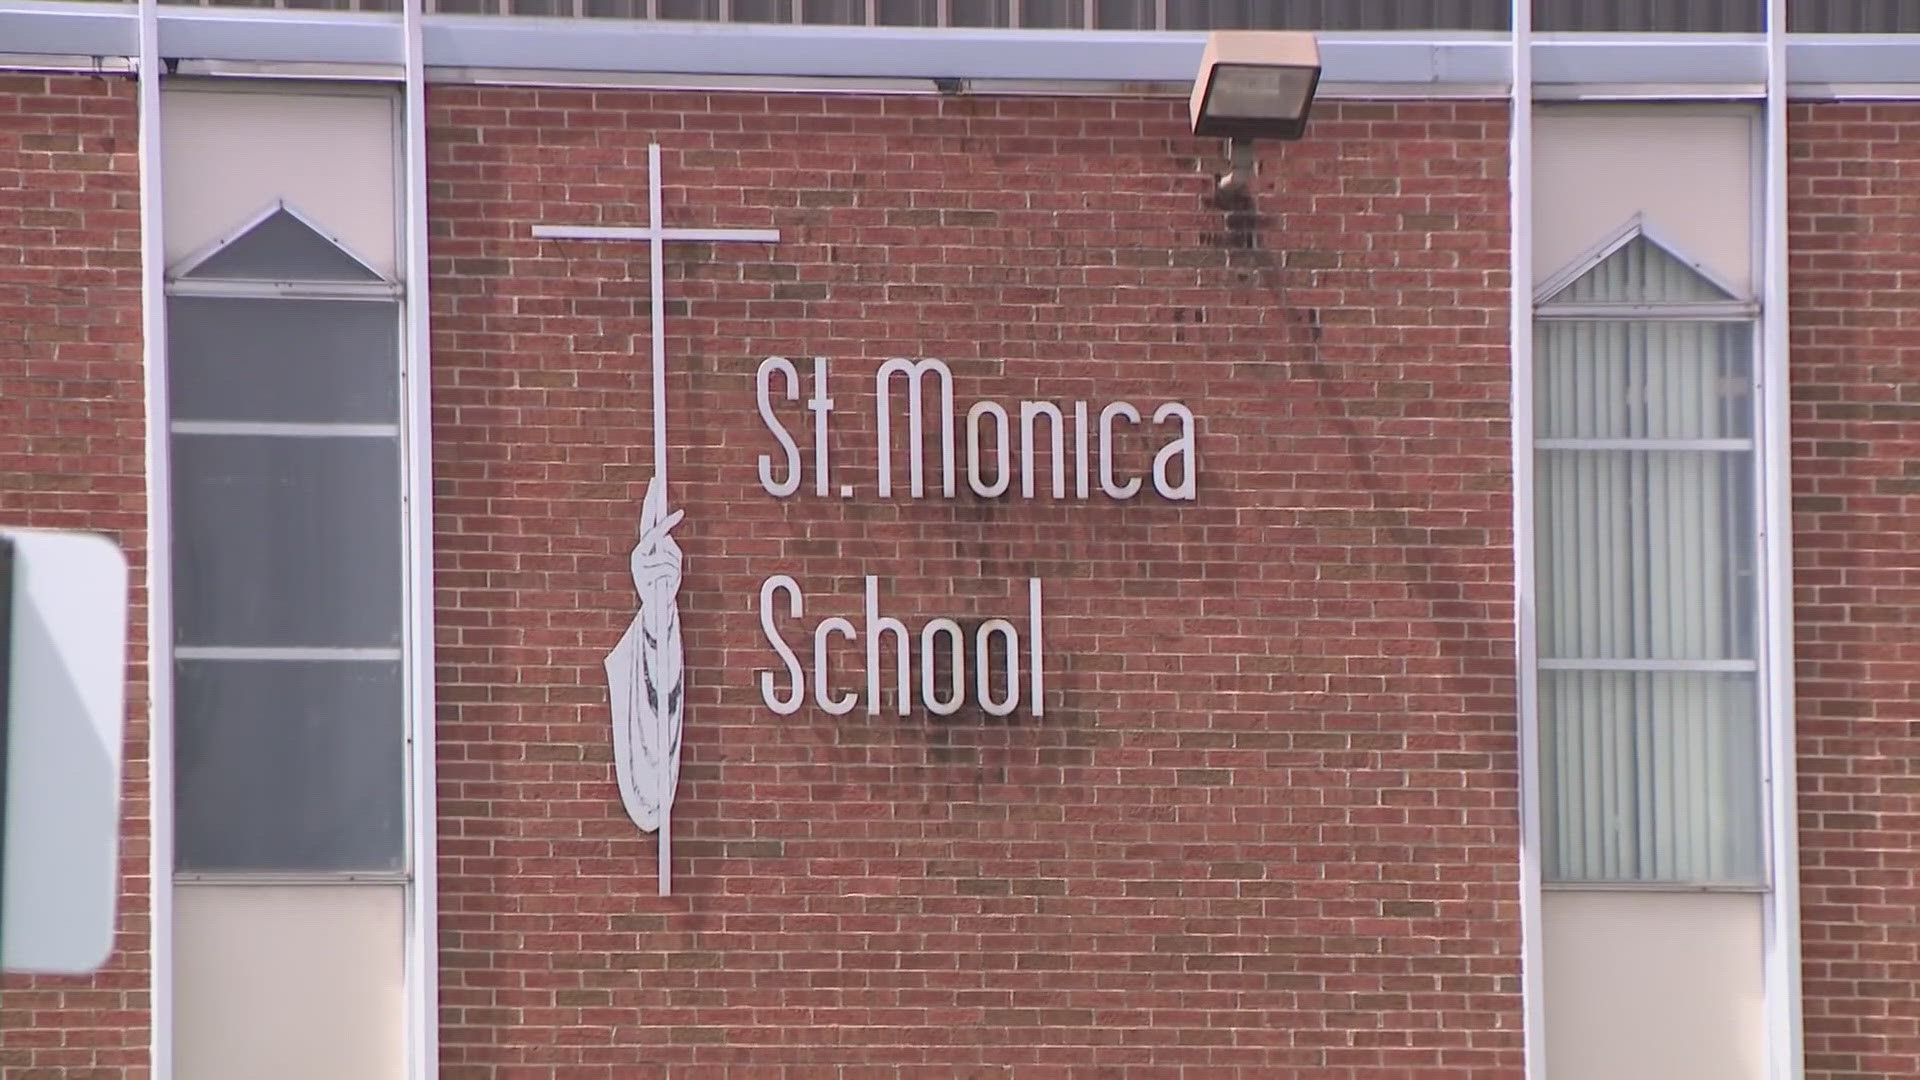 A century-old school is being forced to close. St. Monica Catholic School in Creve Coeur is the latest Catholic school on the chopping block.